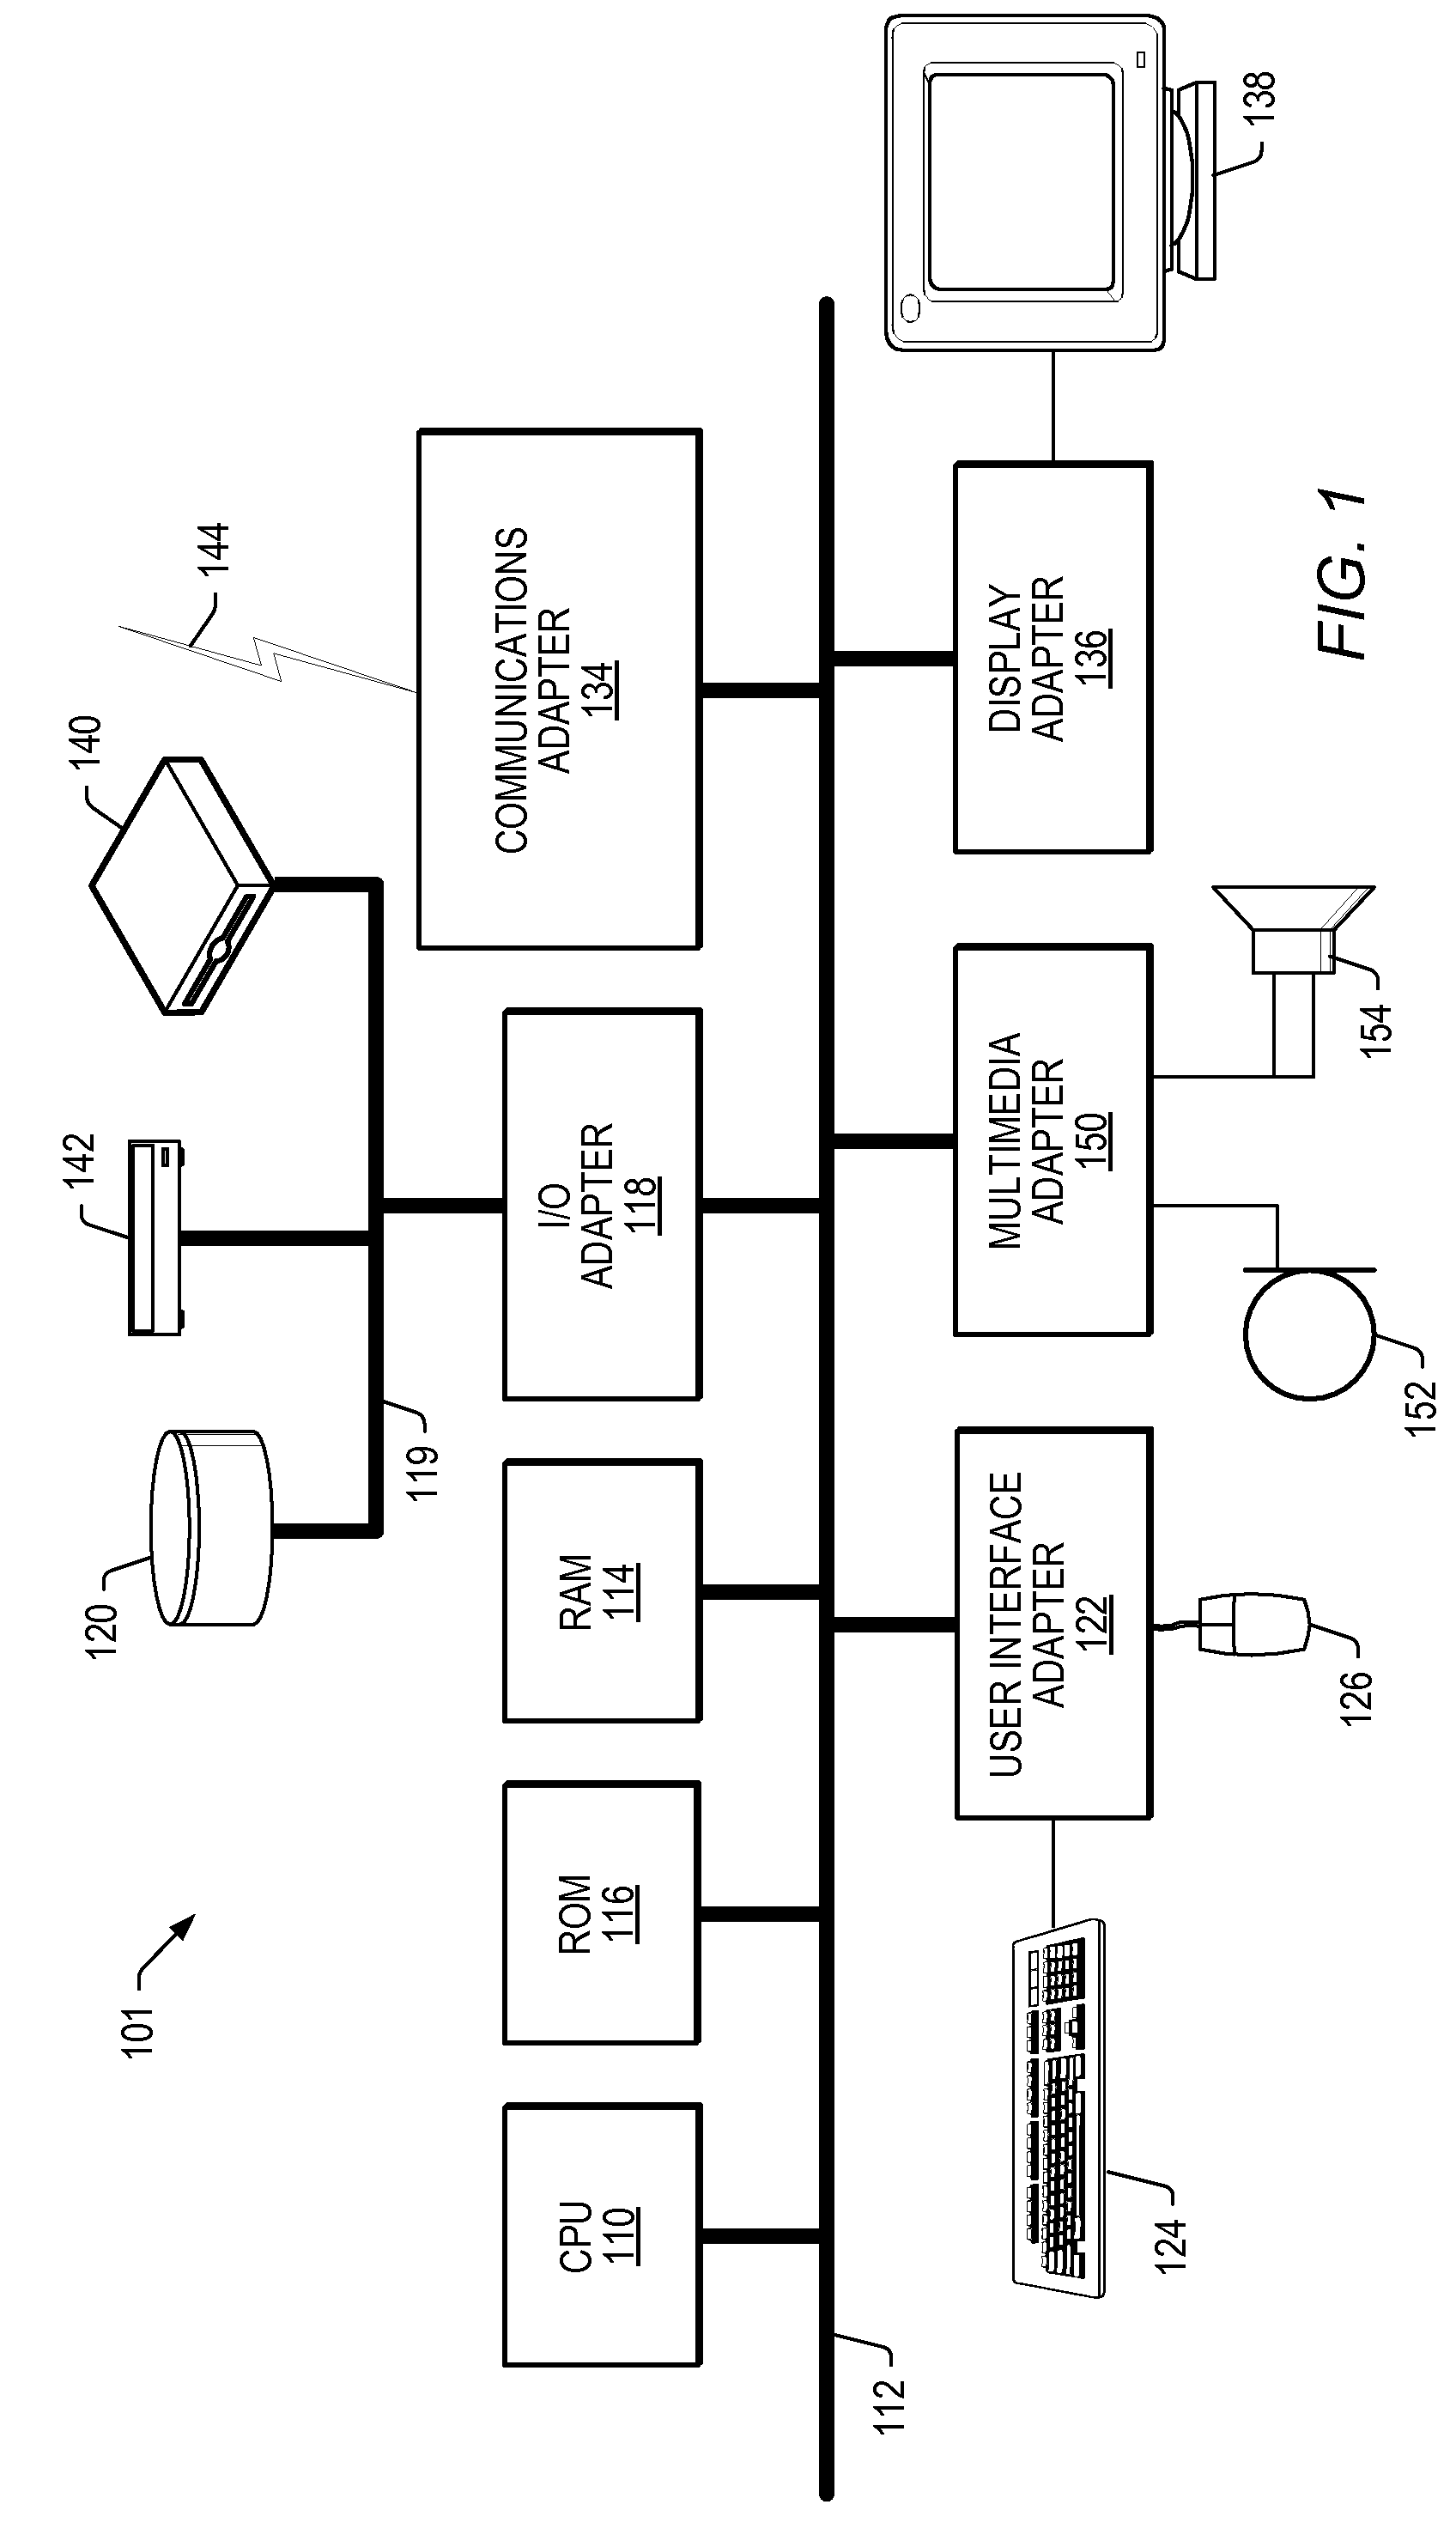 Intelligent storing and retrieving in an enterprise data system